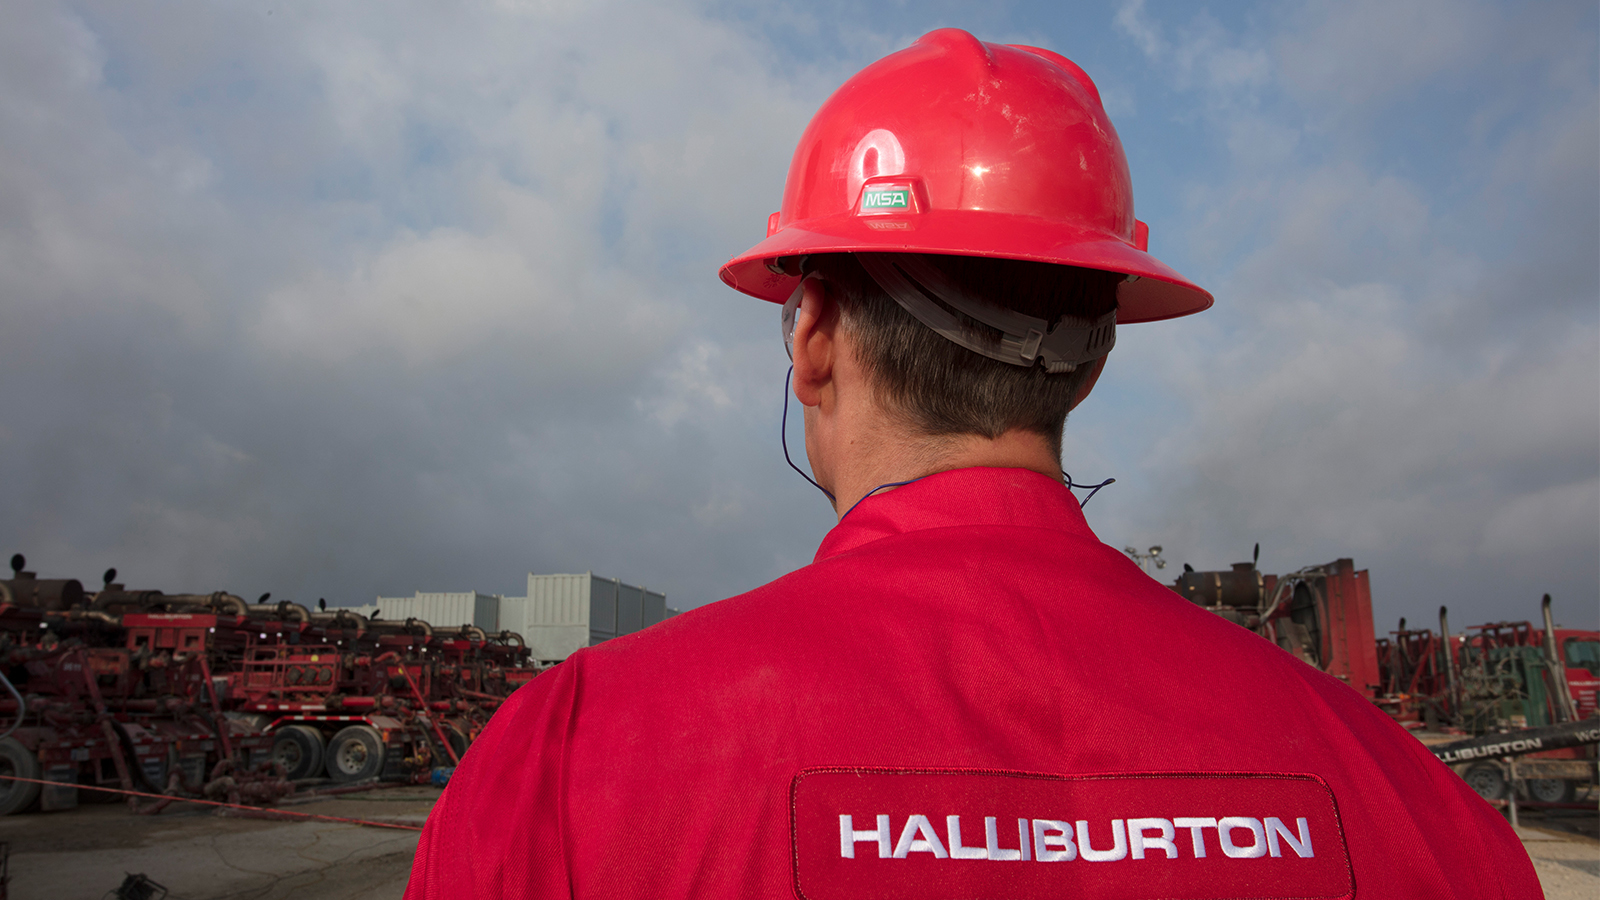 Image shows about a man wearing halliburton uniform and red hat 